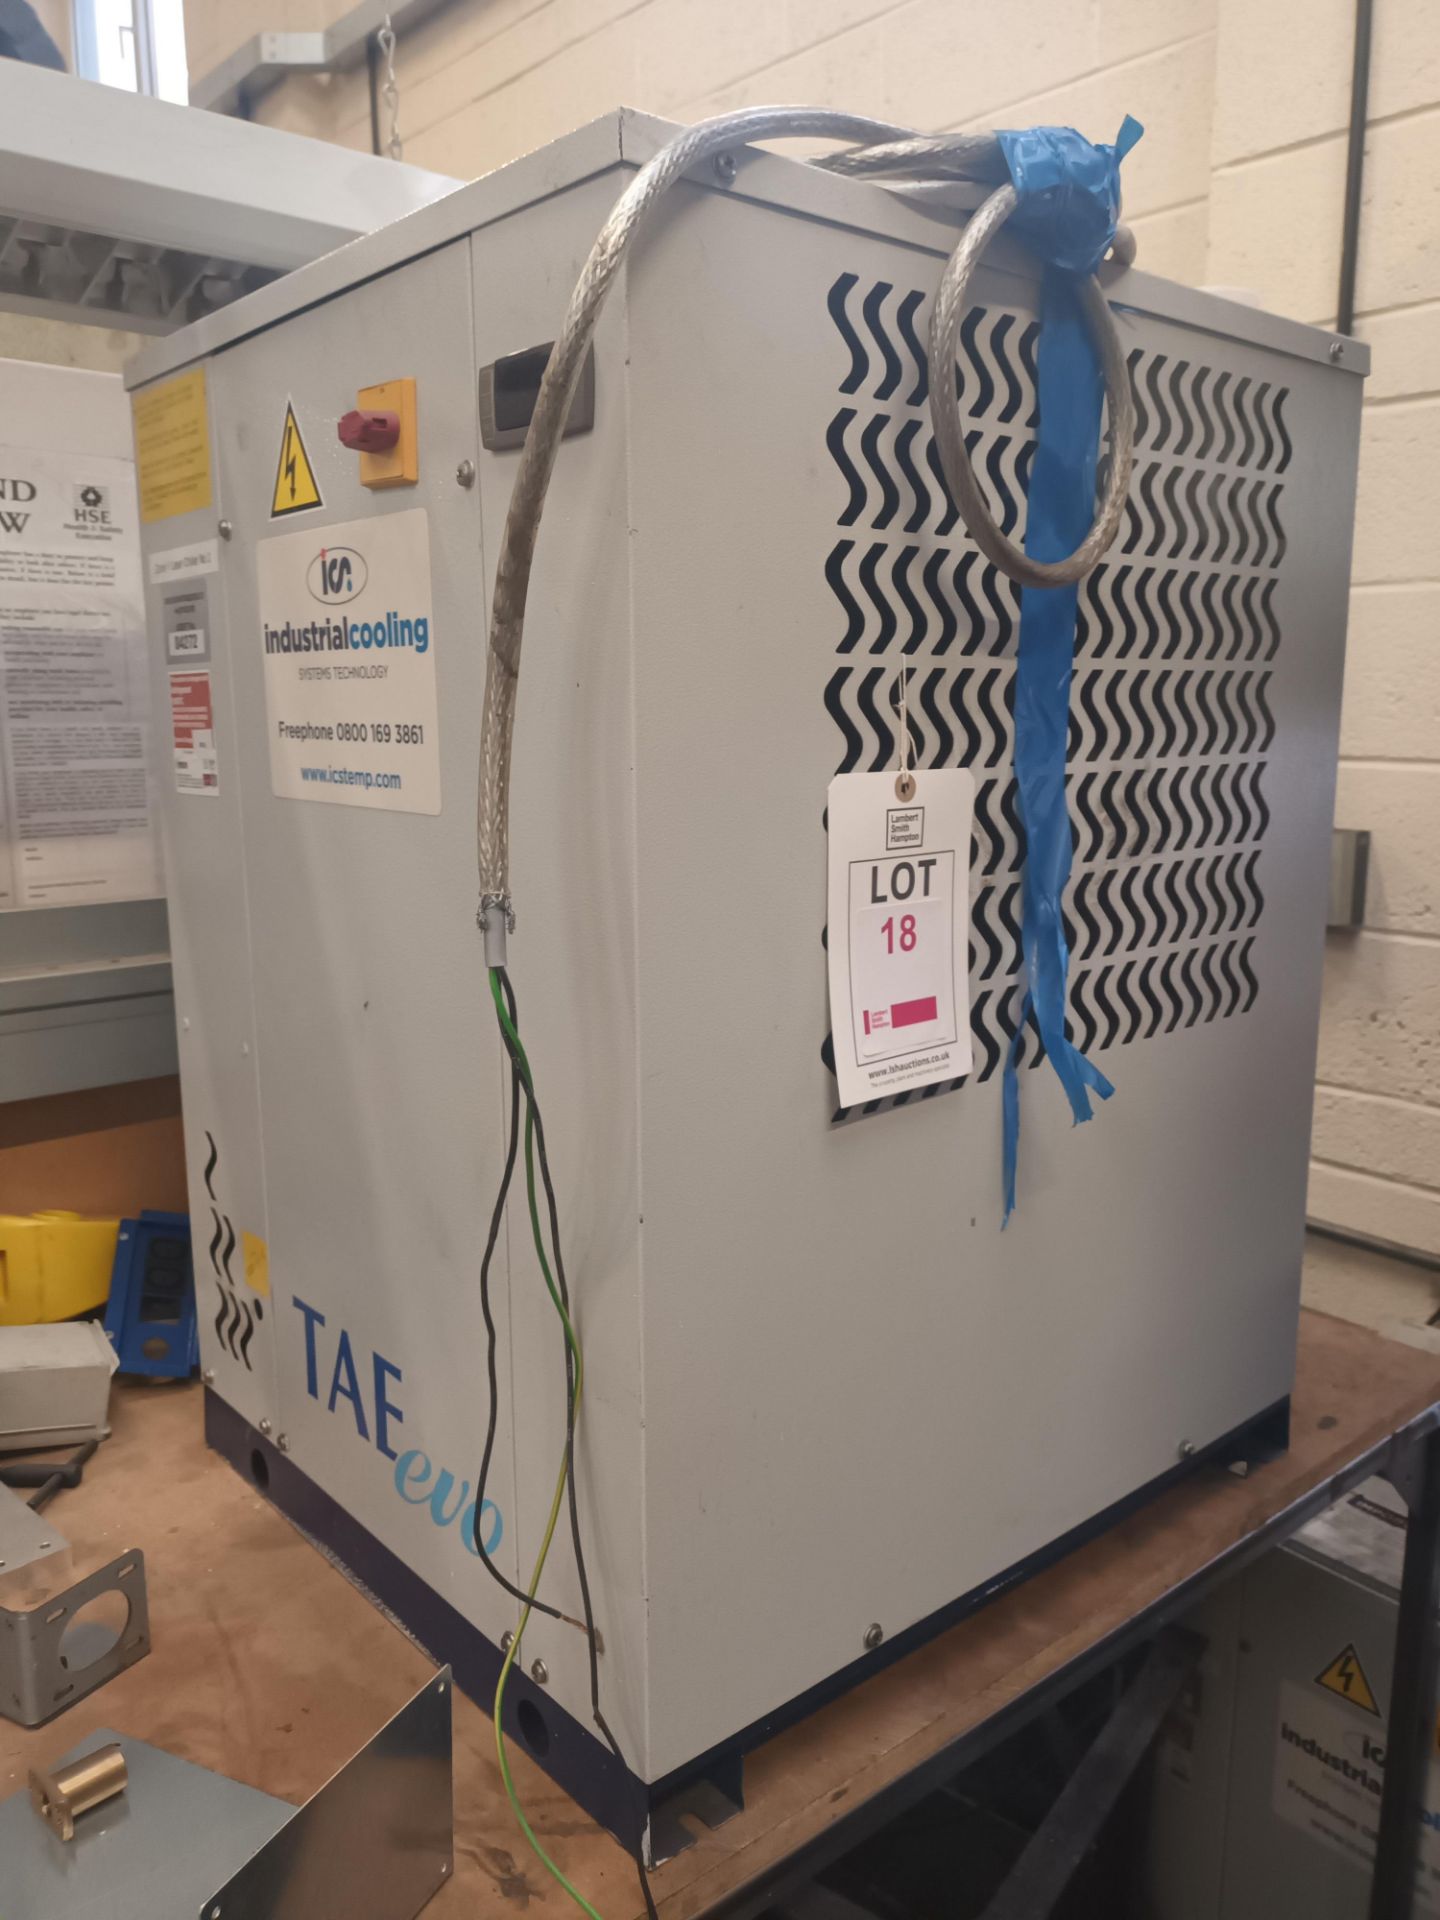 Two TAE Evo M10 chiller units (2012)